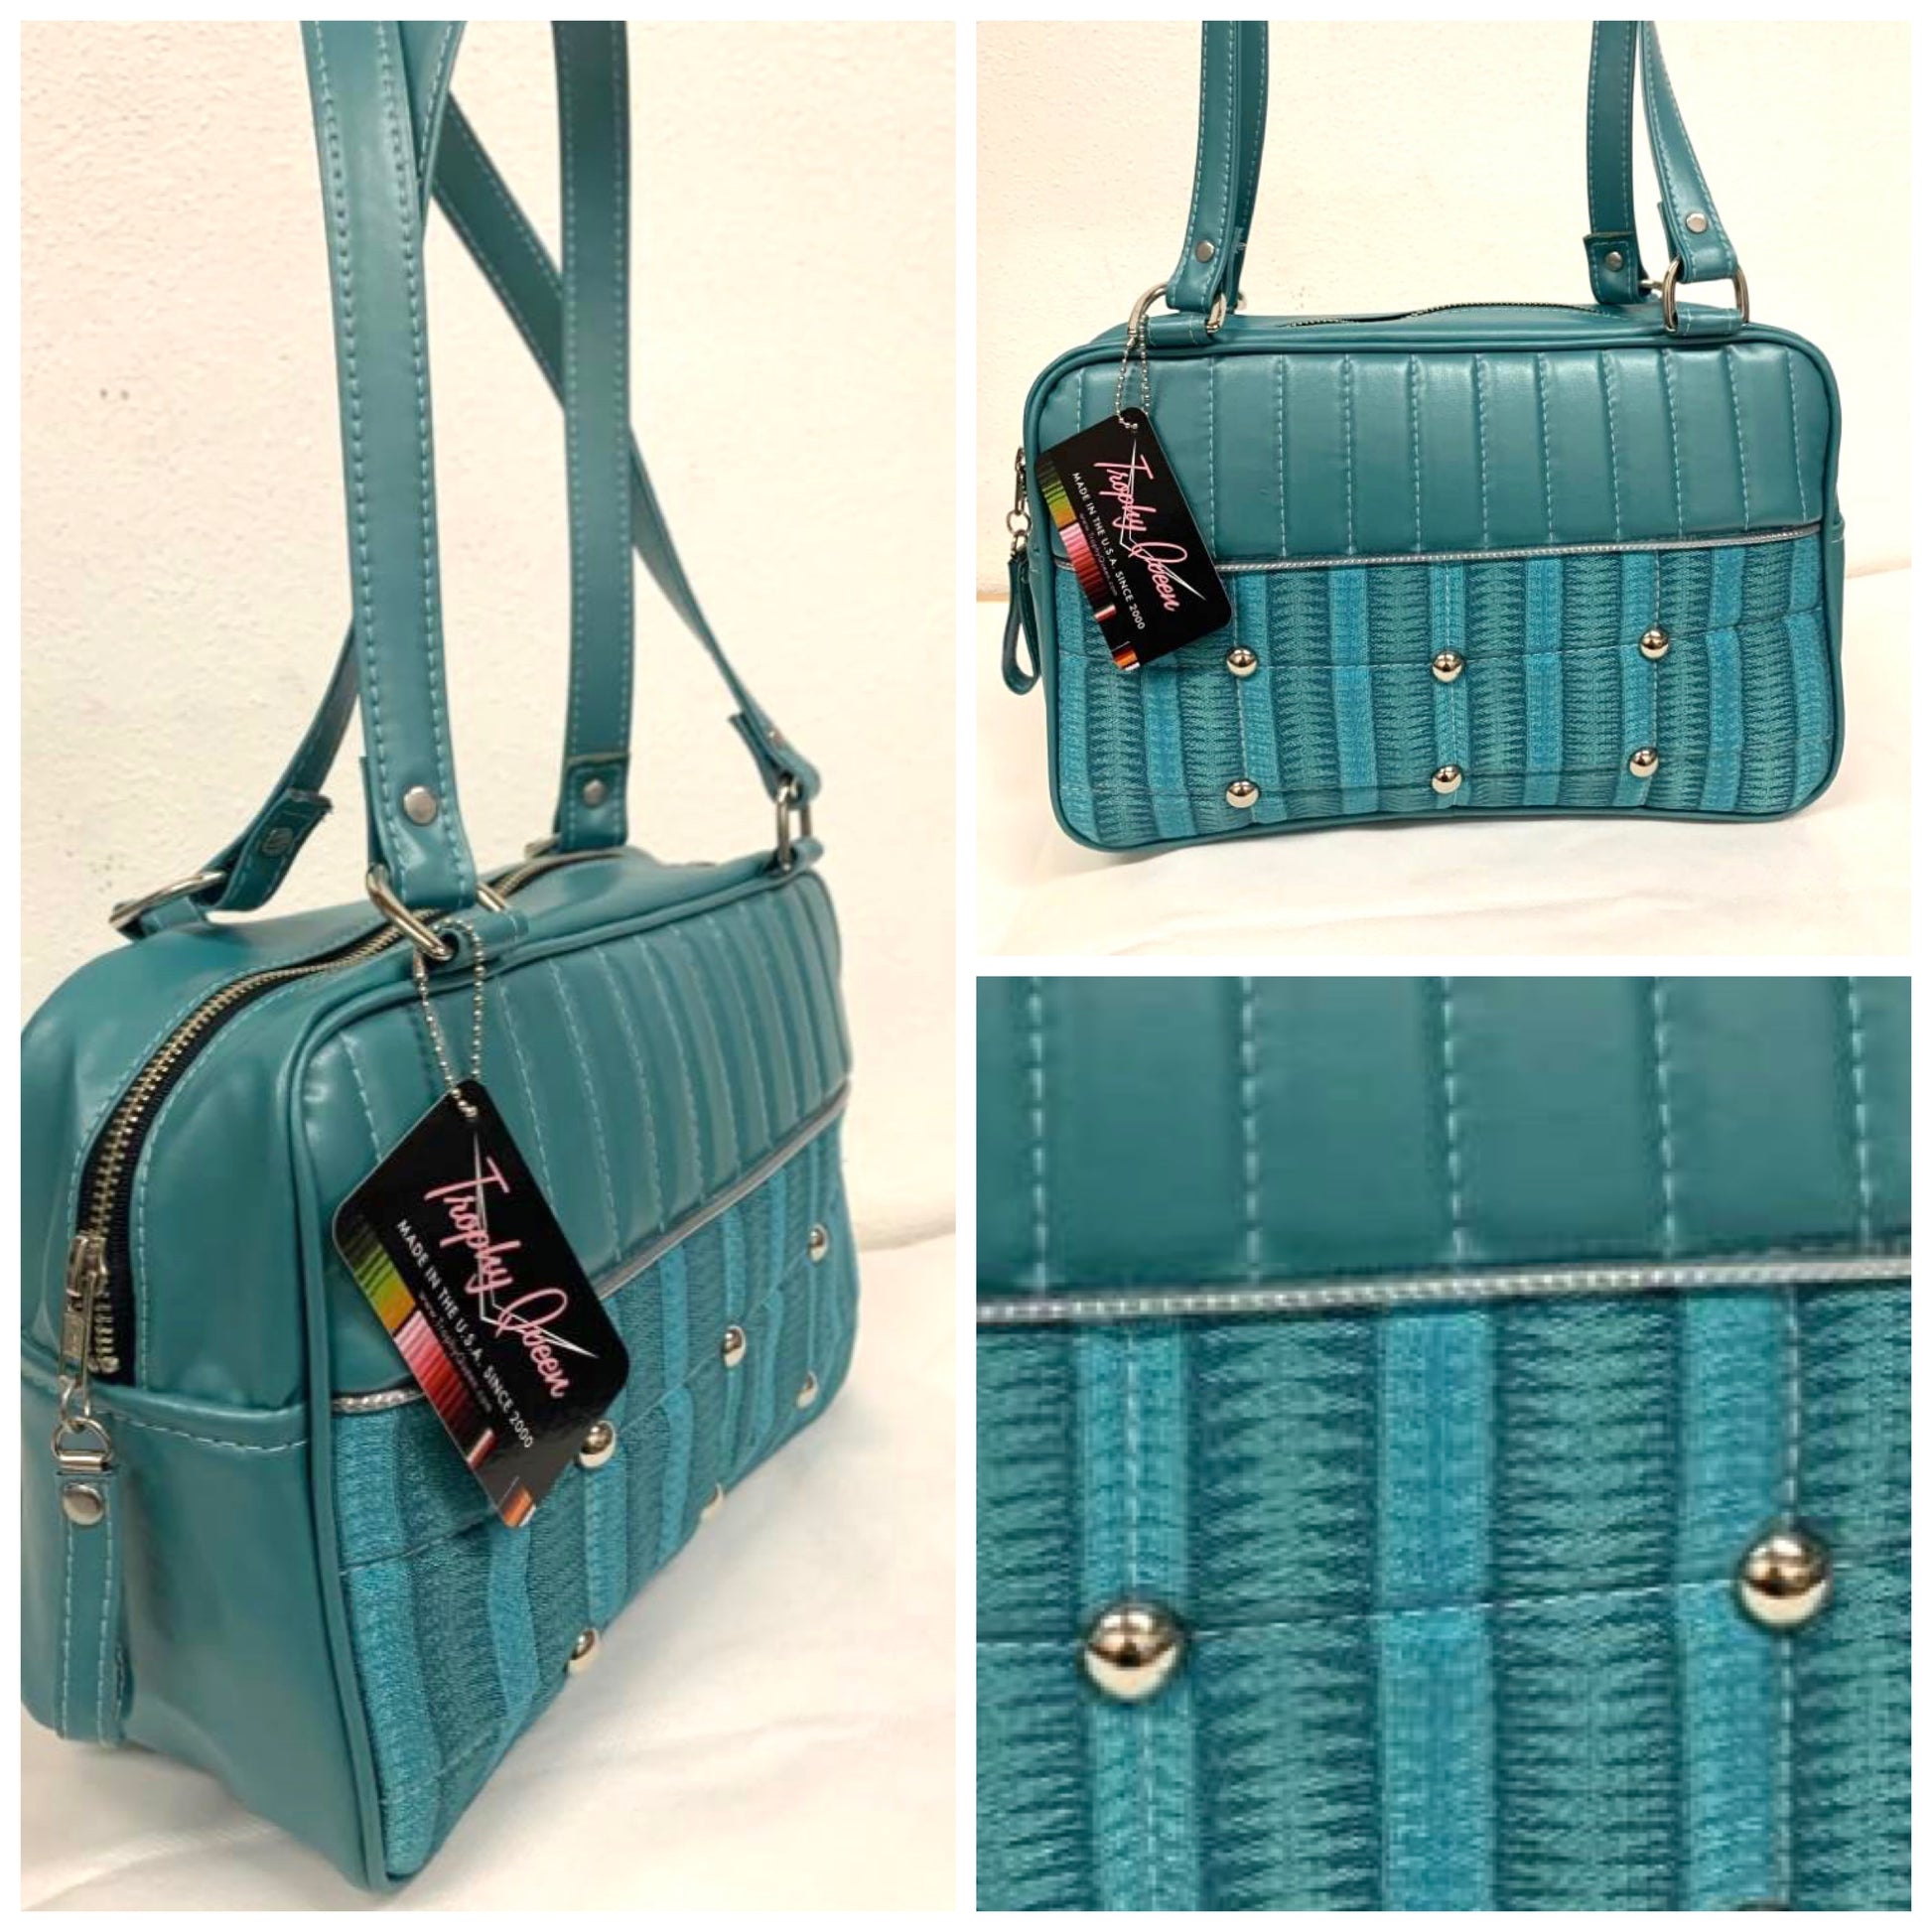 Lincoln Tote in Limited Edition Vintage Turquoise ‘65 Chevy Fabric and Vintage Turquoise Vinyl with Plush Leopard Lining. Made from NOS Vintage 1965 Chevy Upholstery Fabric with matching vinyl zipper pull, nickel feet, inside zipper pocket with serial number and open divided pocket with signature Trophy Queen label. The straps are approximately 25” and come with an extra set of replacement straps. Locally made and ships from California